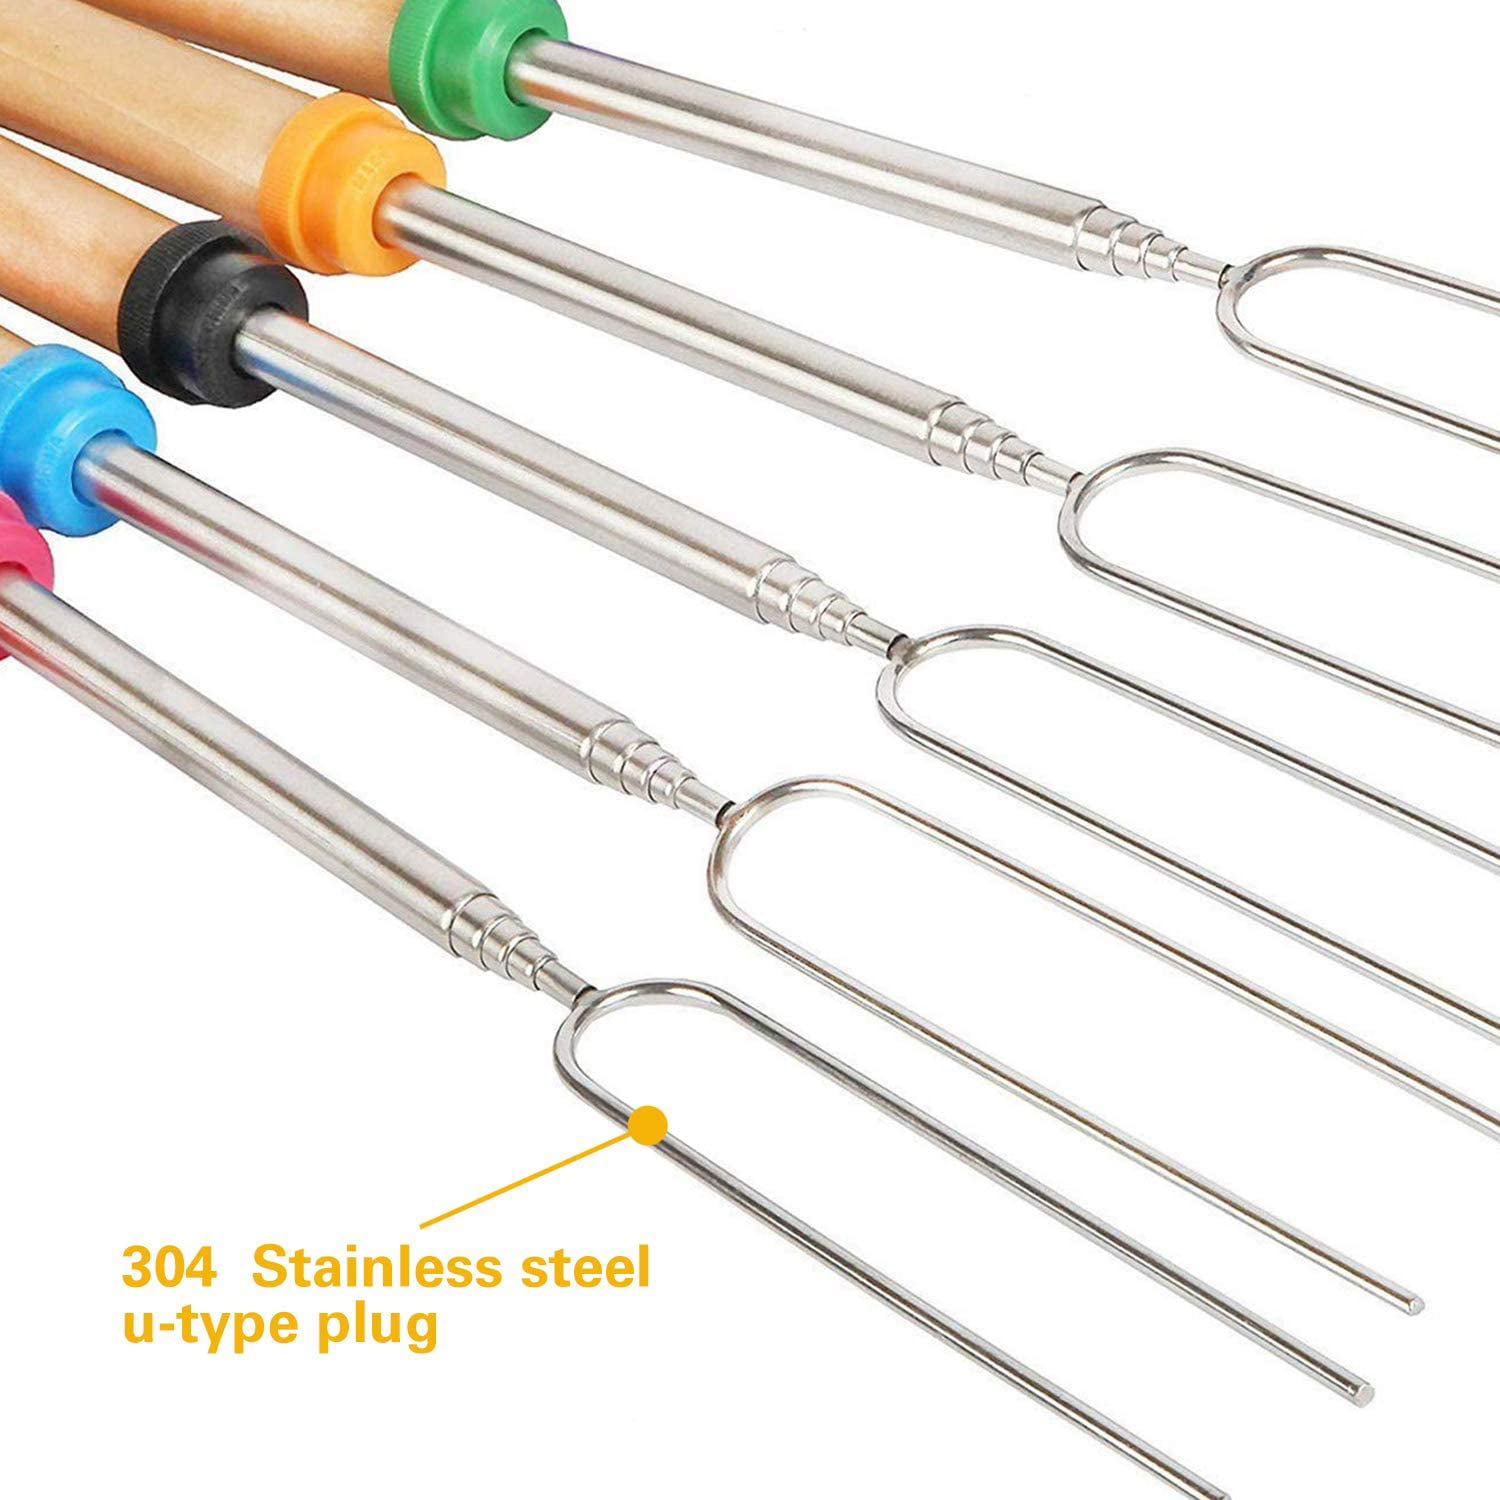 45 Inch Hot Dogs Set of 5 Rolete Extra Long Roasting Sticks in Premium Stainless Steel for Marshmallows 